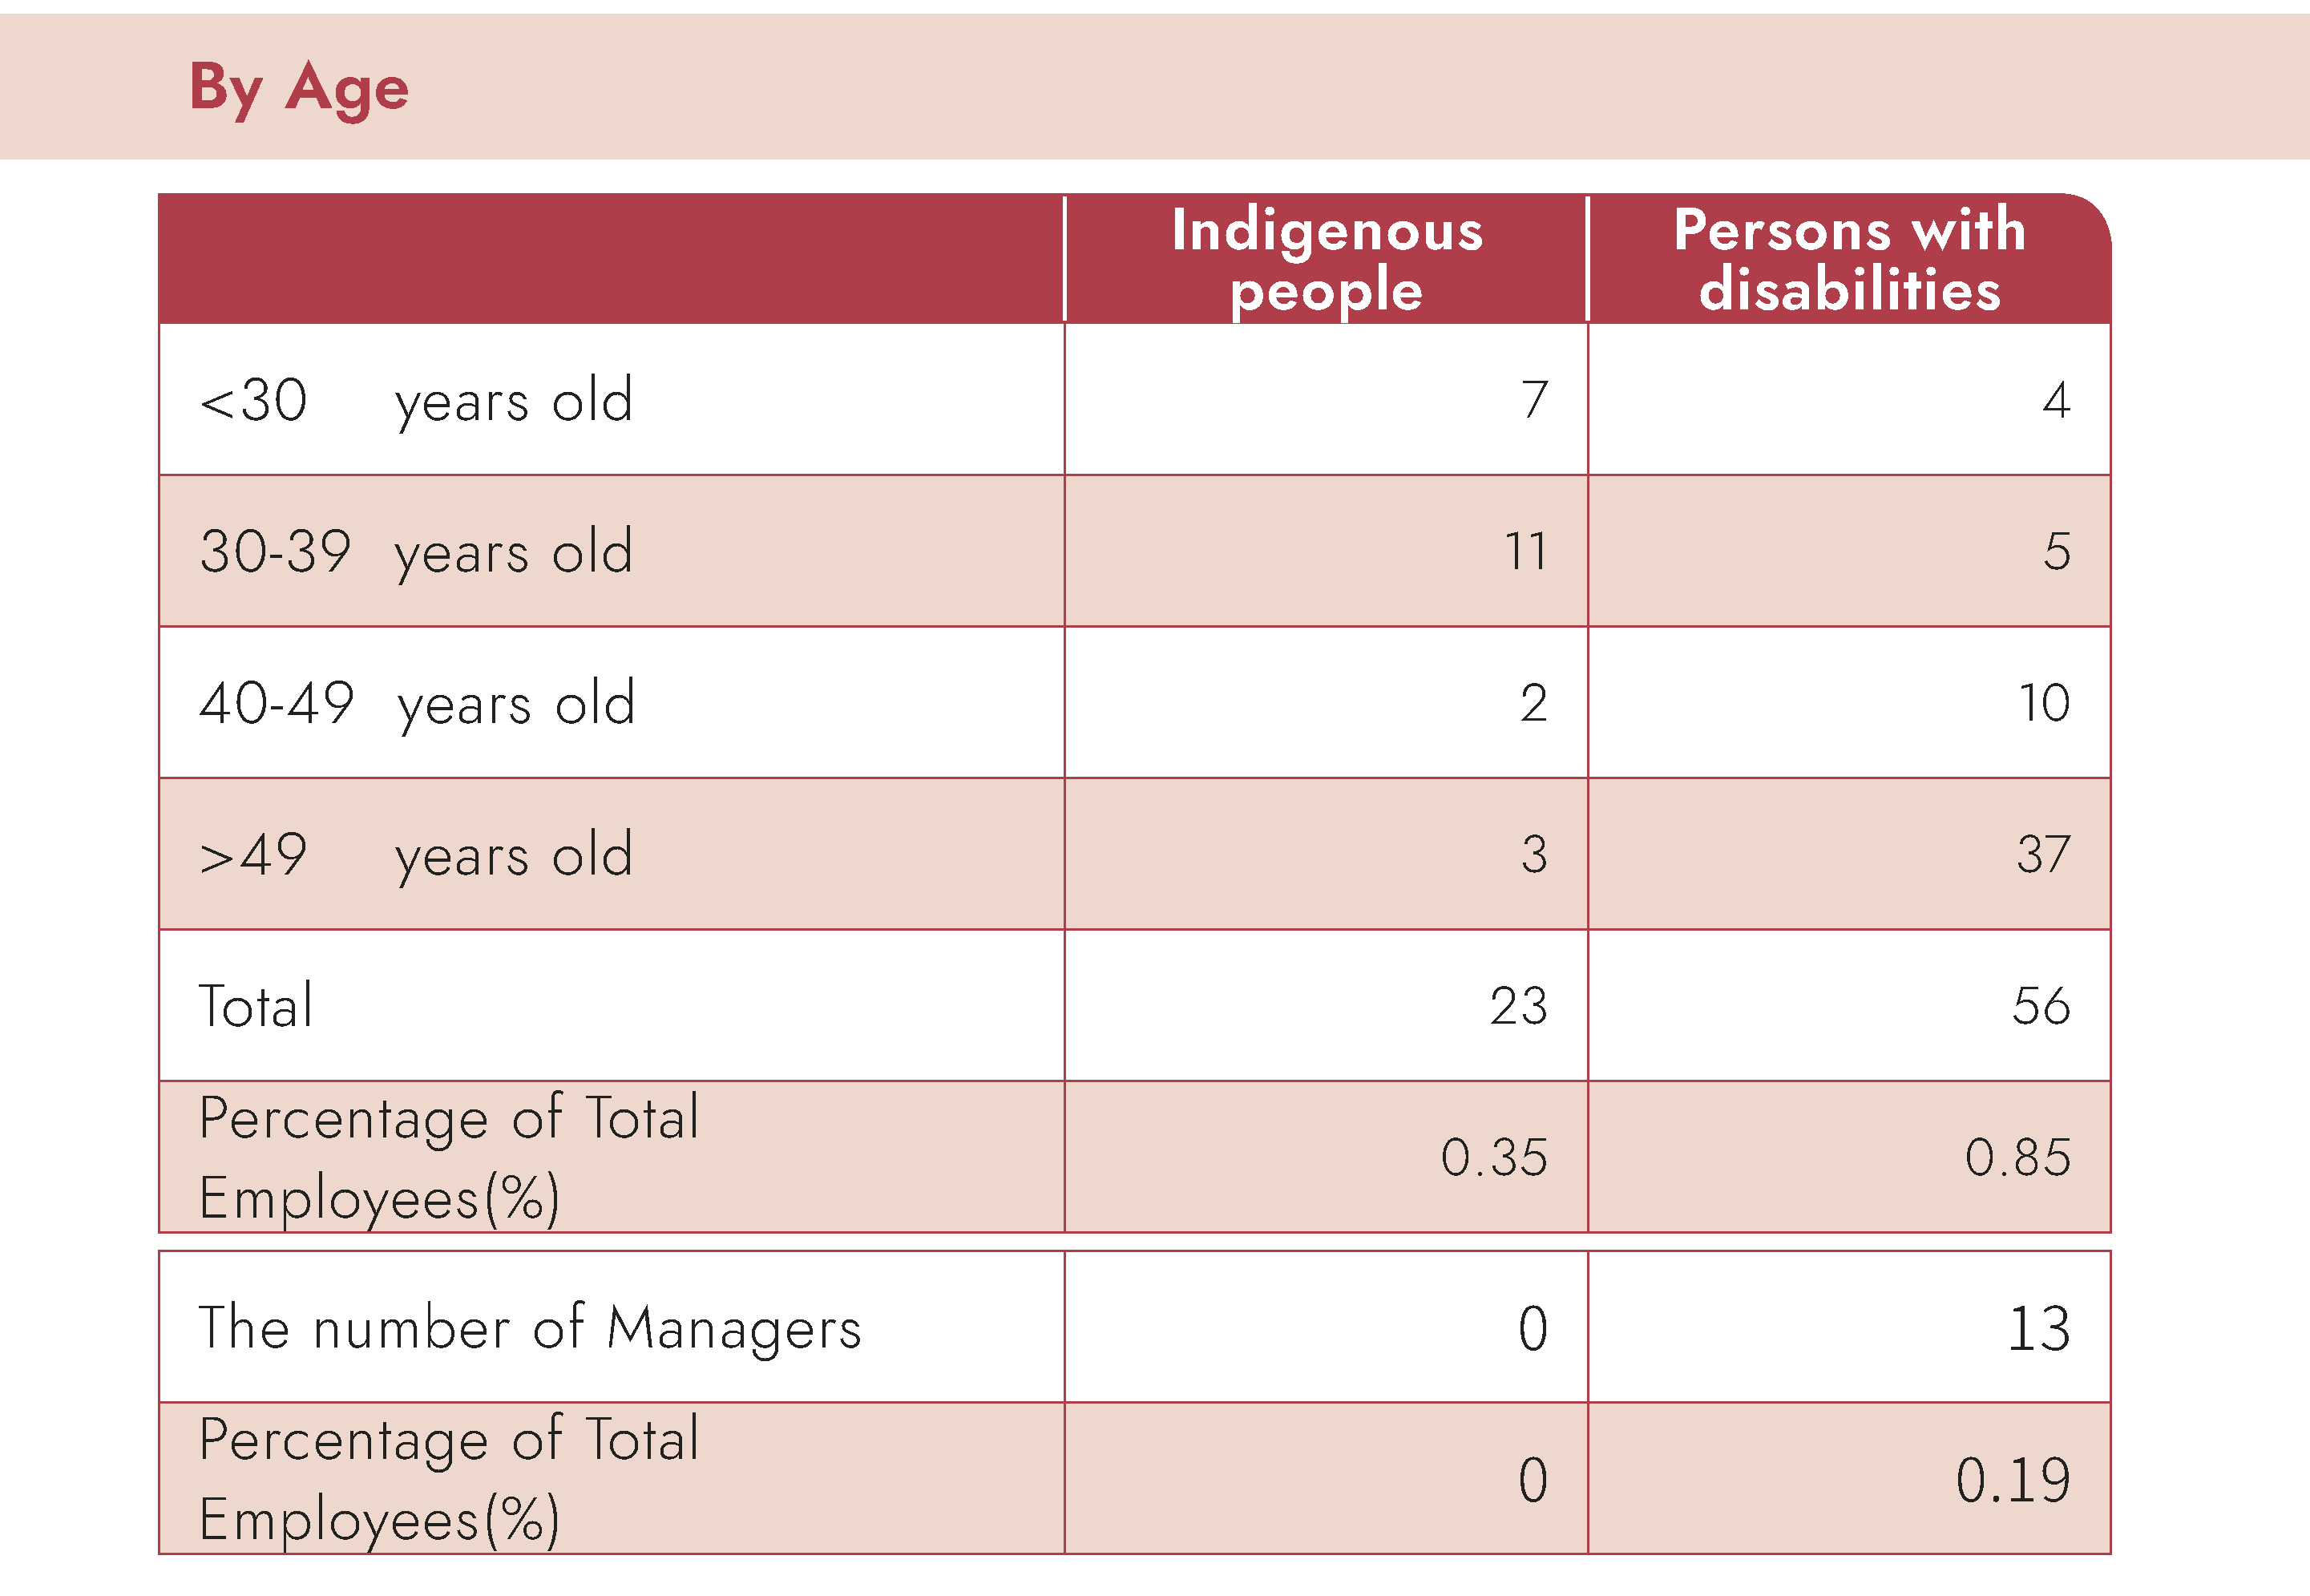 Accession of Persons with Disabilities and Indigenous Peoples-By Age